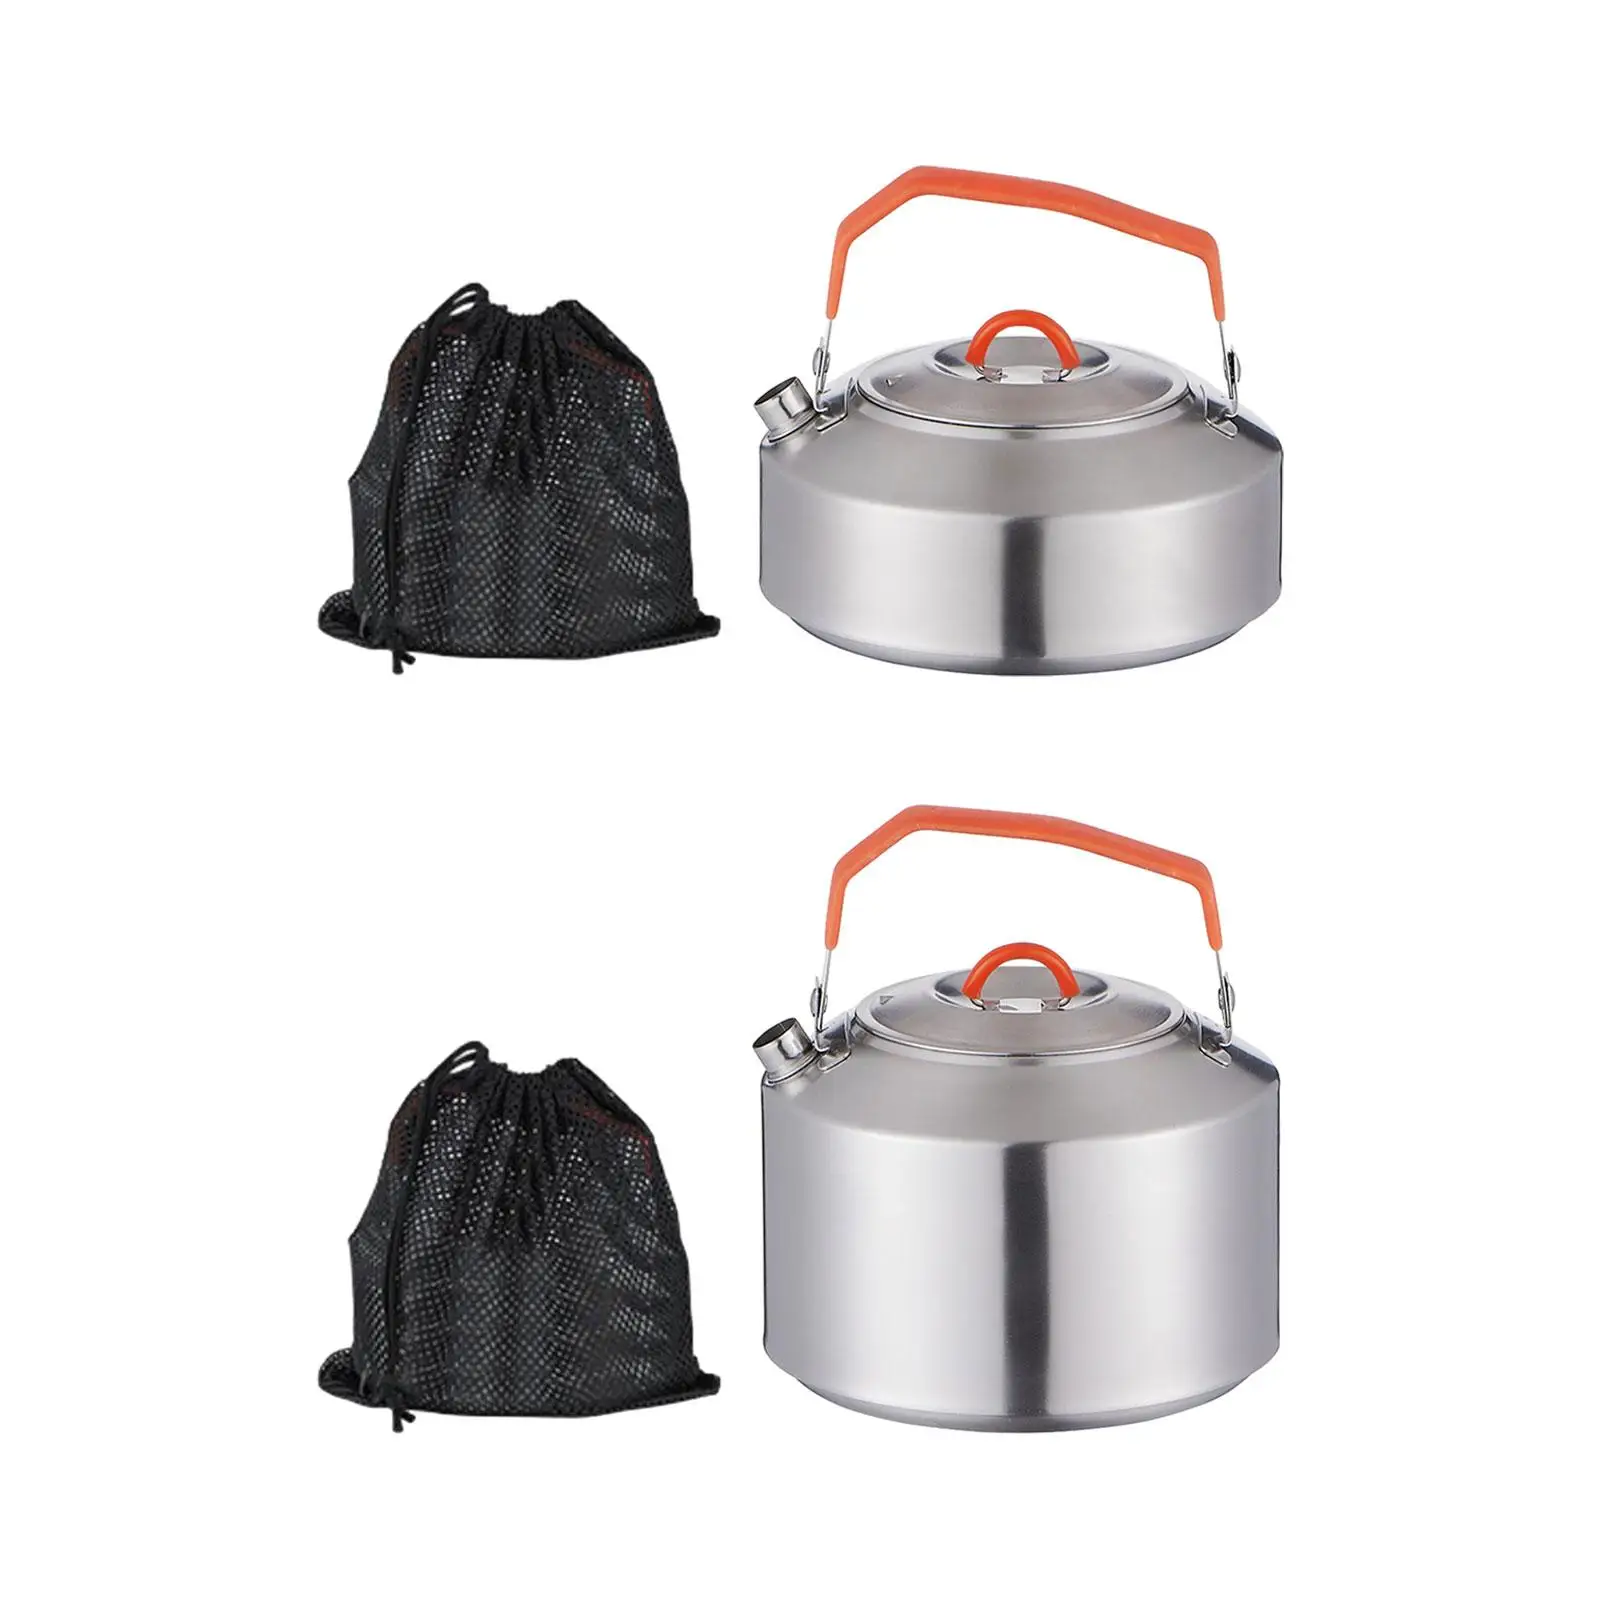 Camping Water Kettle Teakettle Teapot for Mountaineering Backpacking Travel